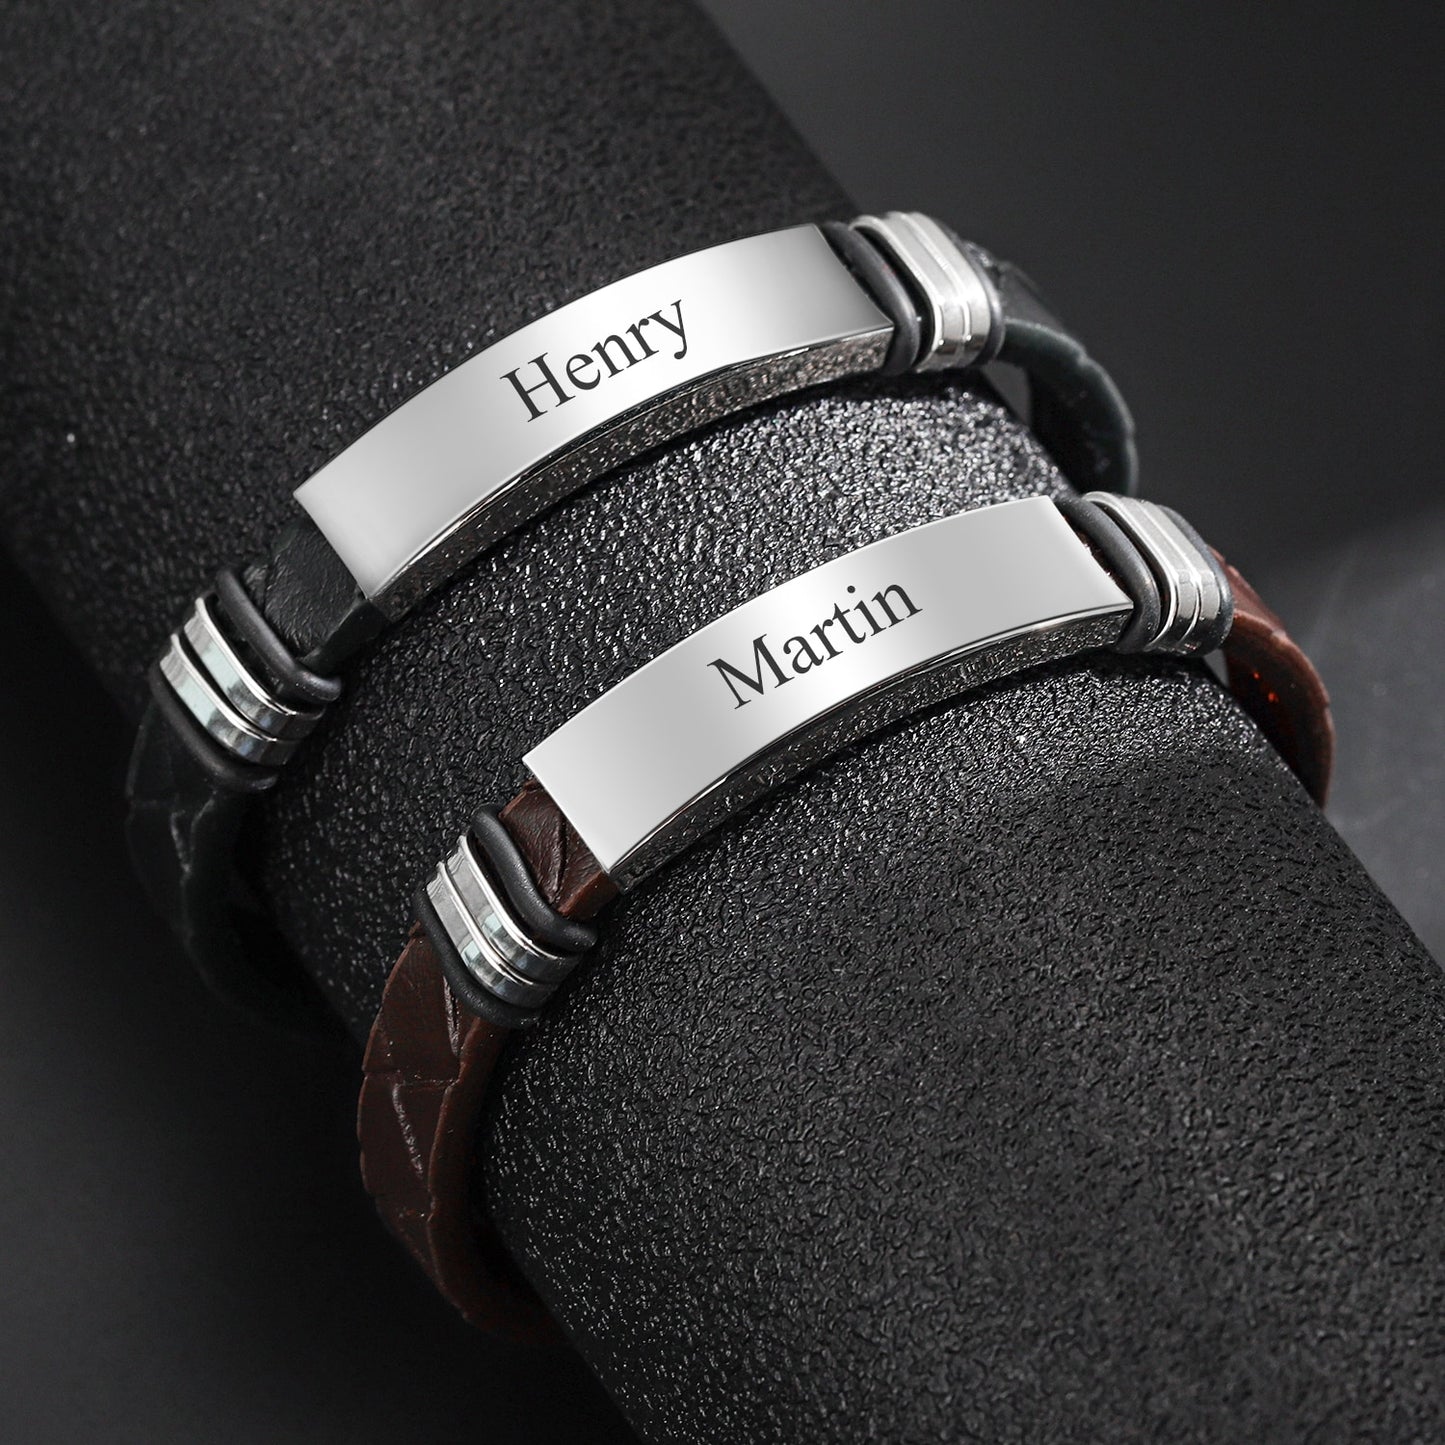 Personalized leather bracelet with engraving for man